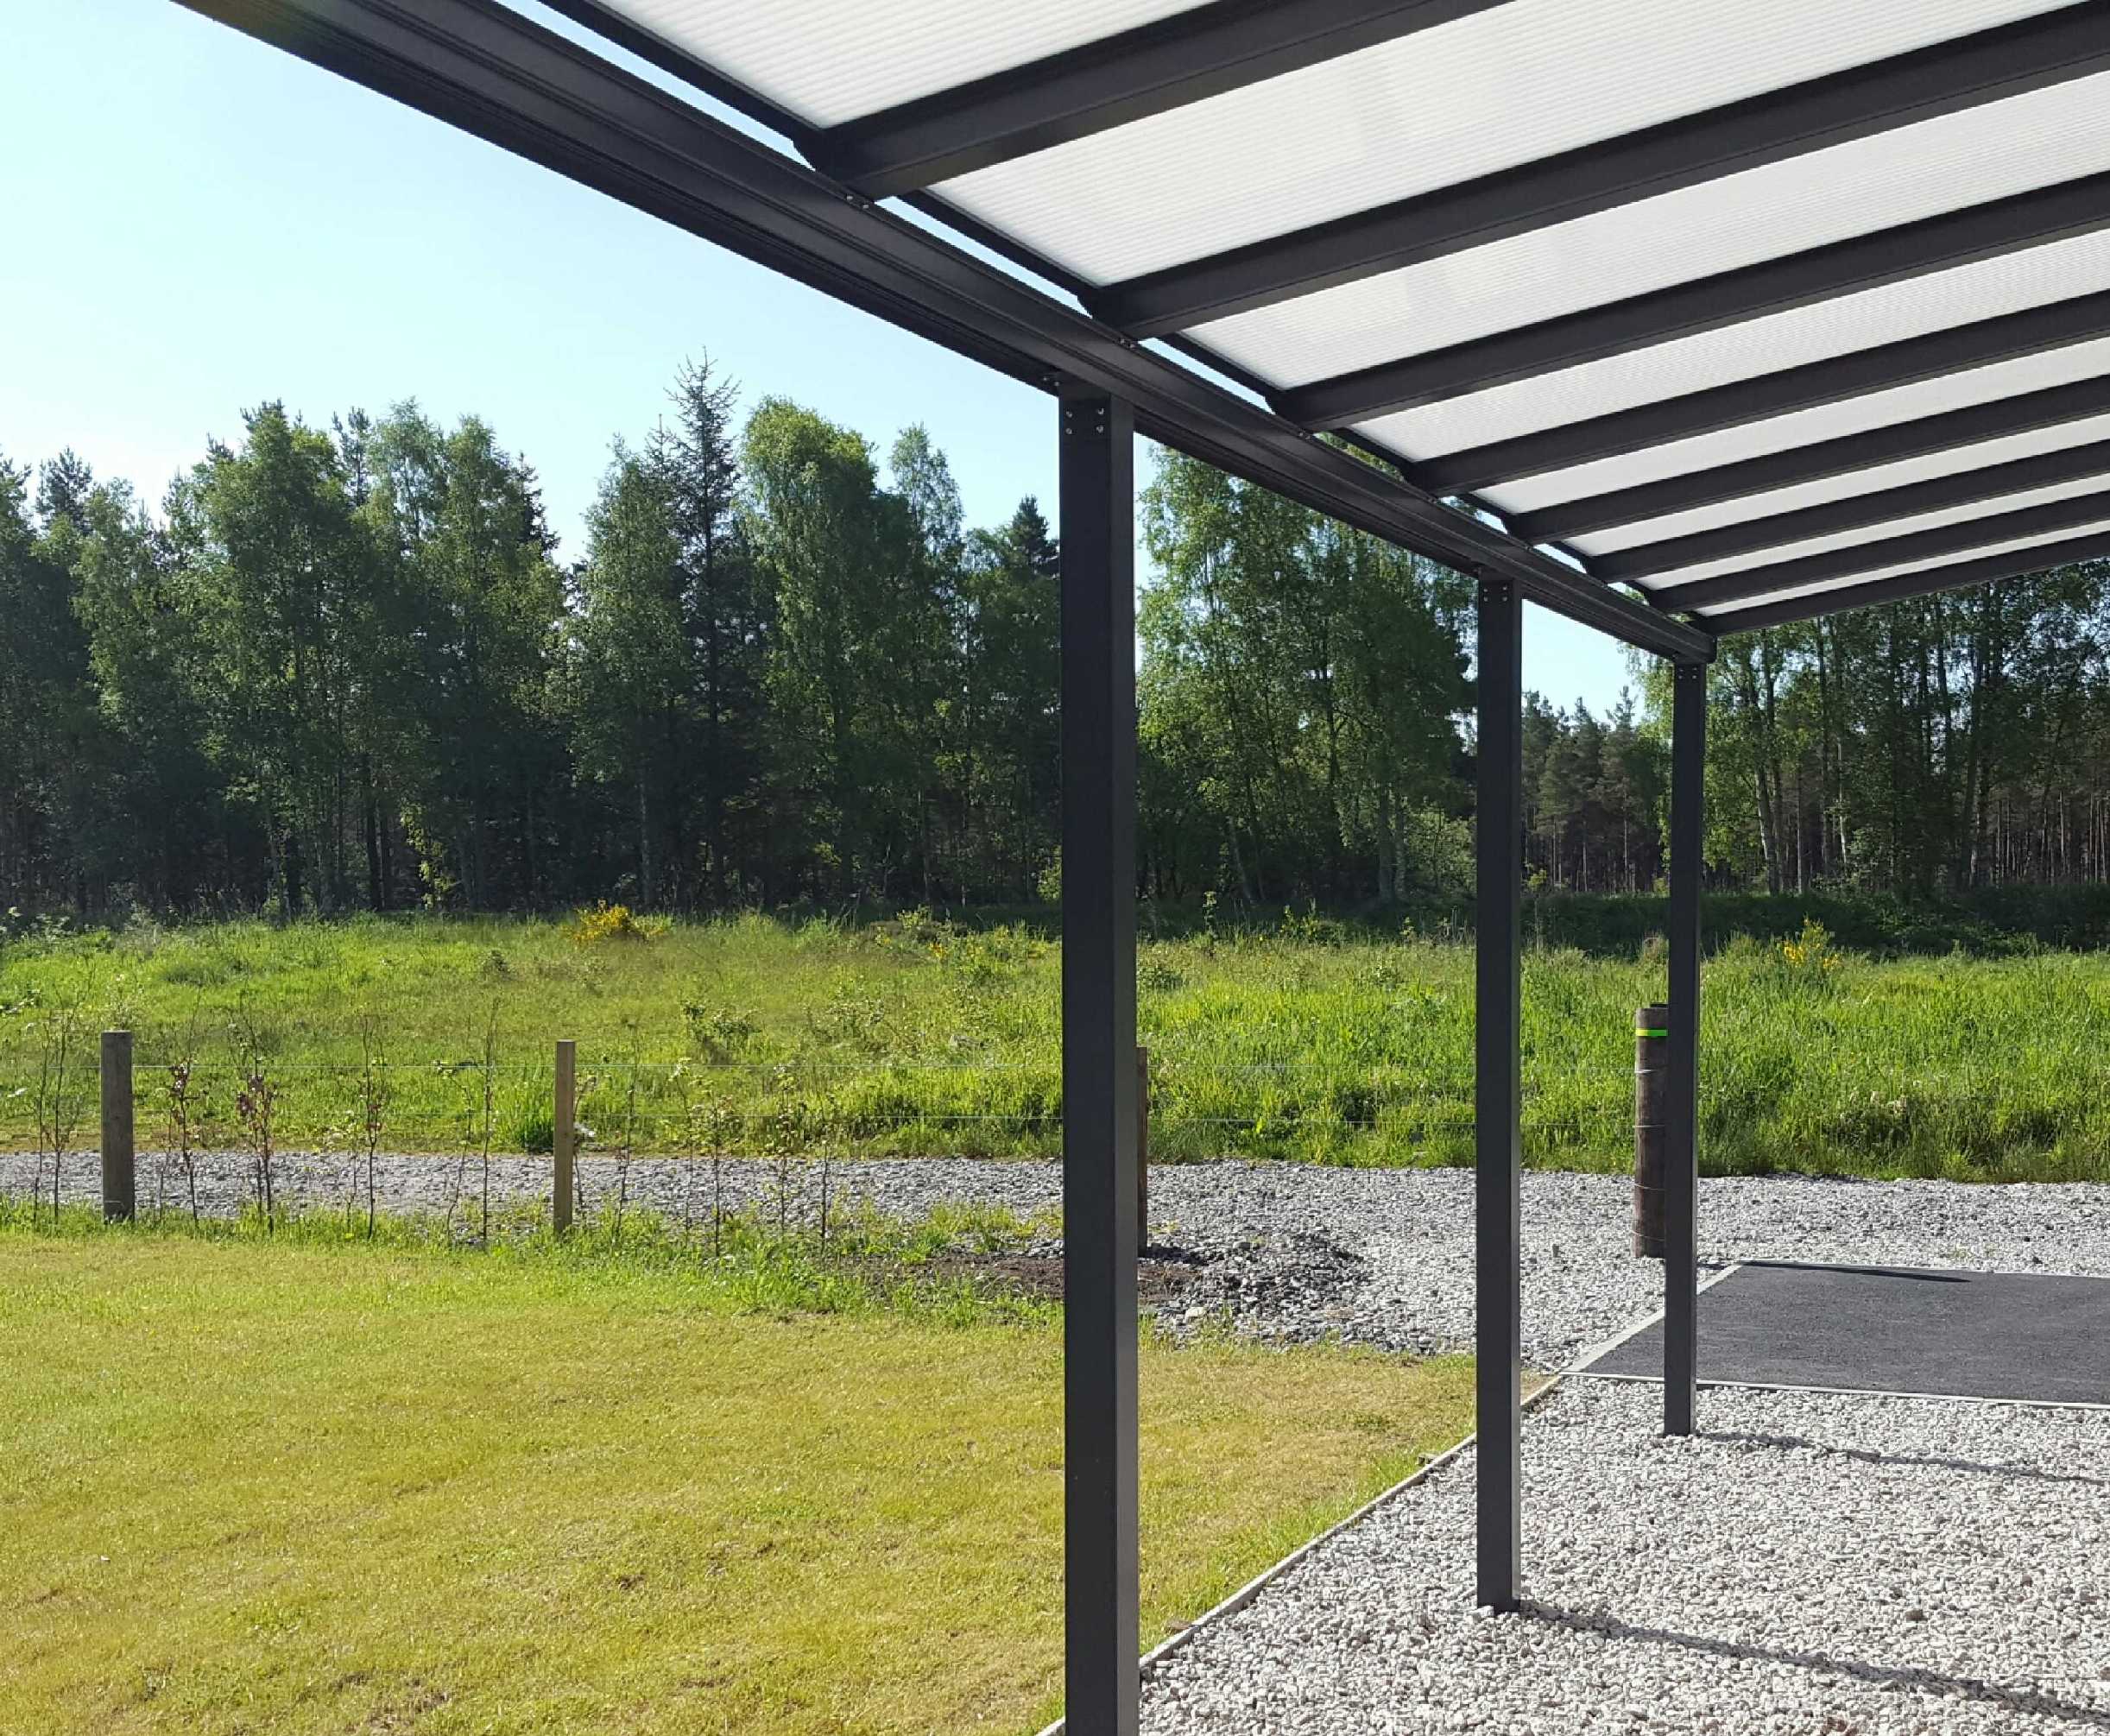 Omega Smart Lean-To Canopy, Anthracite Grey, 6mm Glass Clear Plate Polycarbonate Glazing - 10.5m (W) x 3.0m (P), (5) Supporting Posts